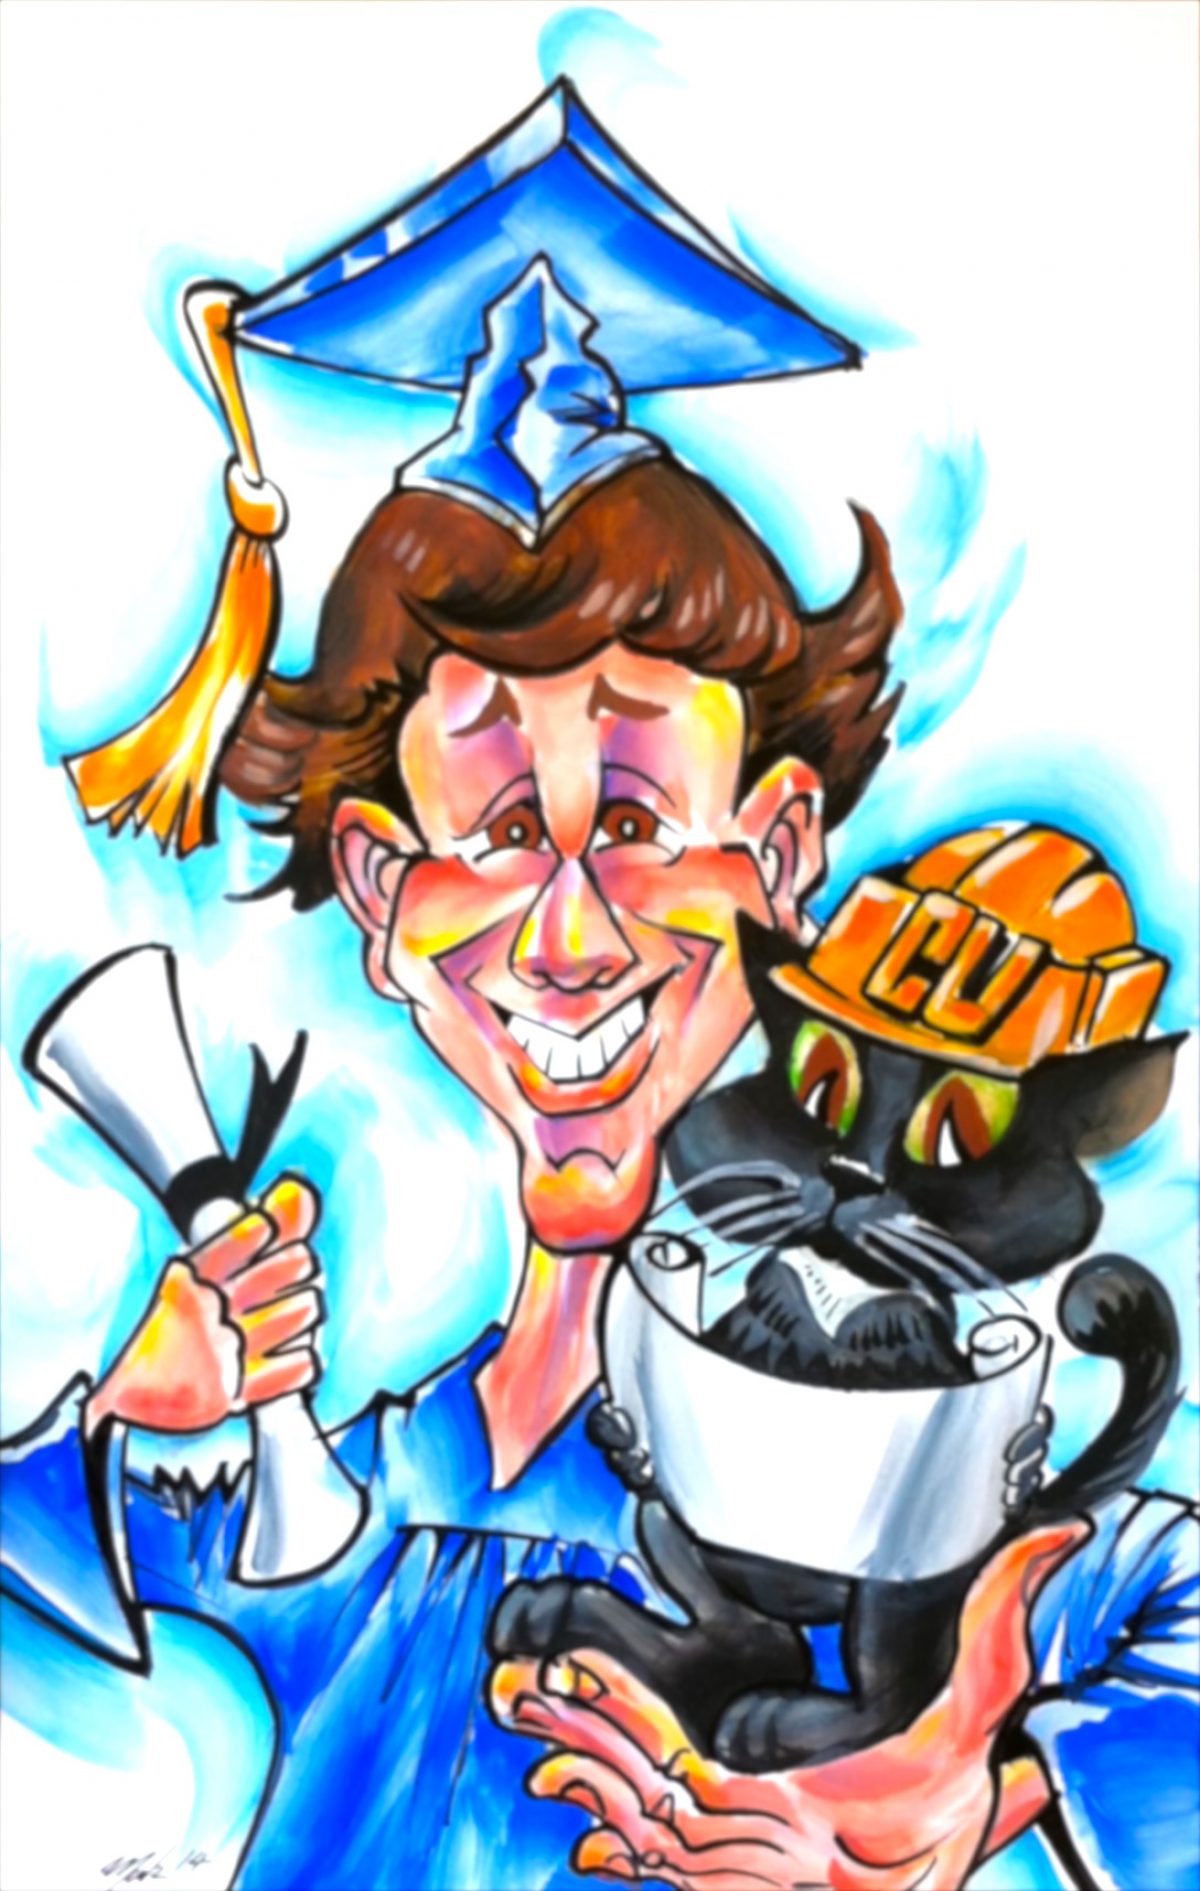 Graduation Party Caricatures For Sale in Denver, CO | Mark Hall 